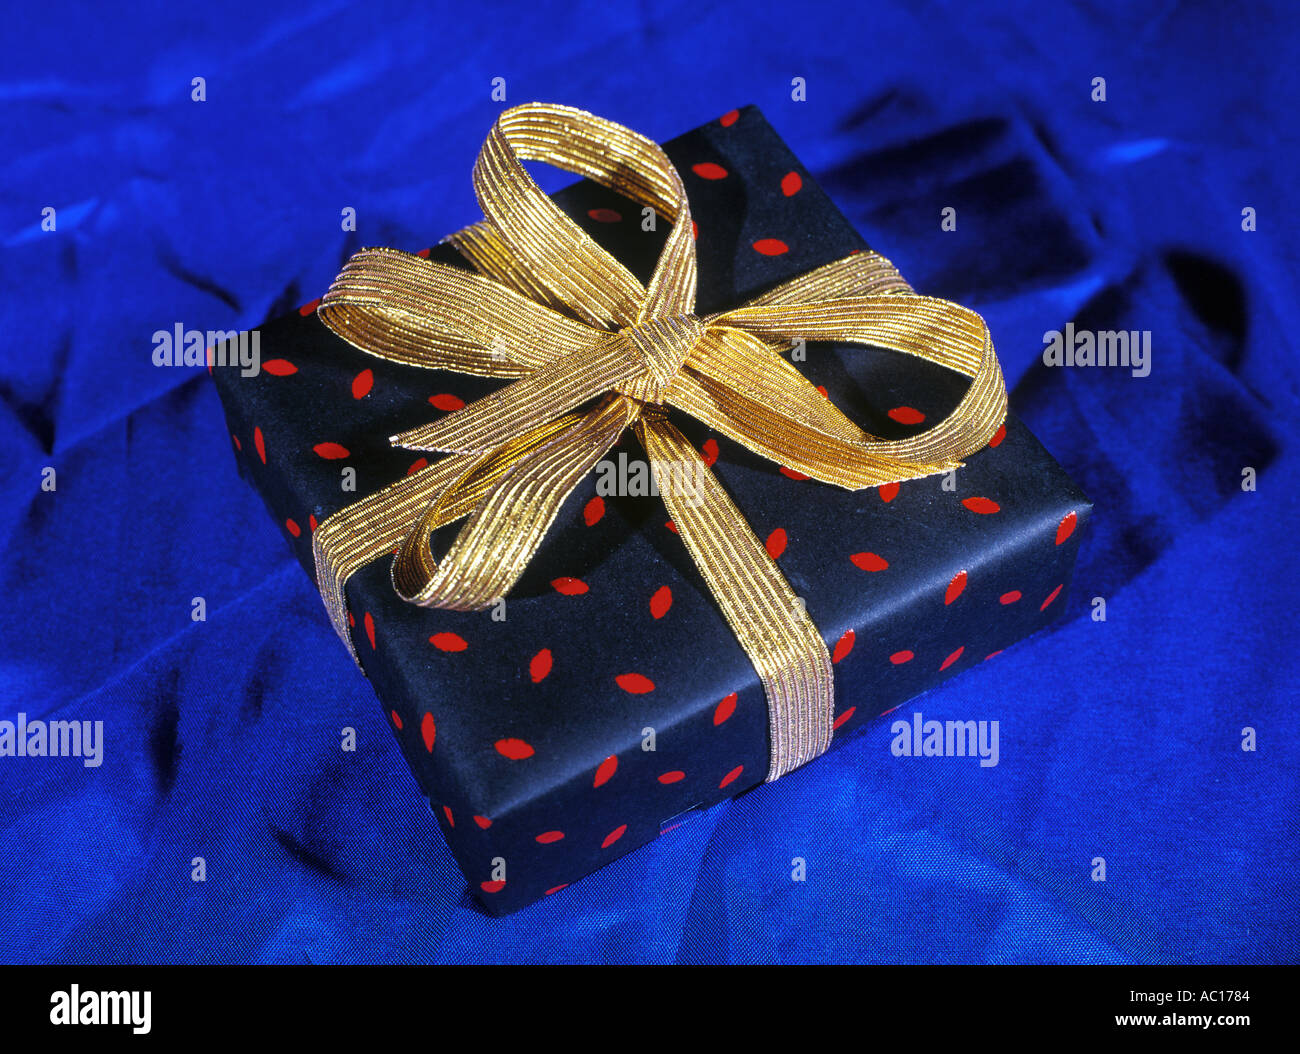 Wrapped present Stock Photo